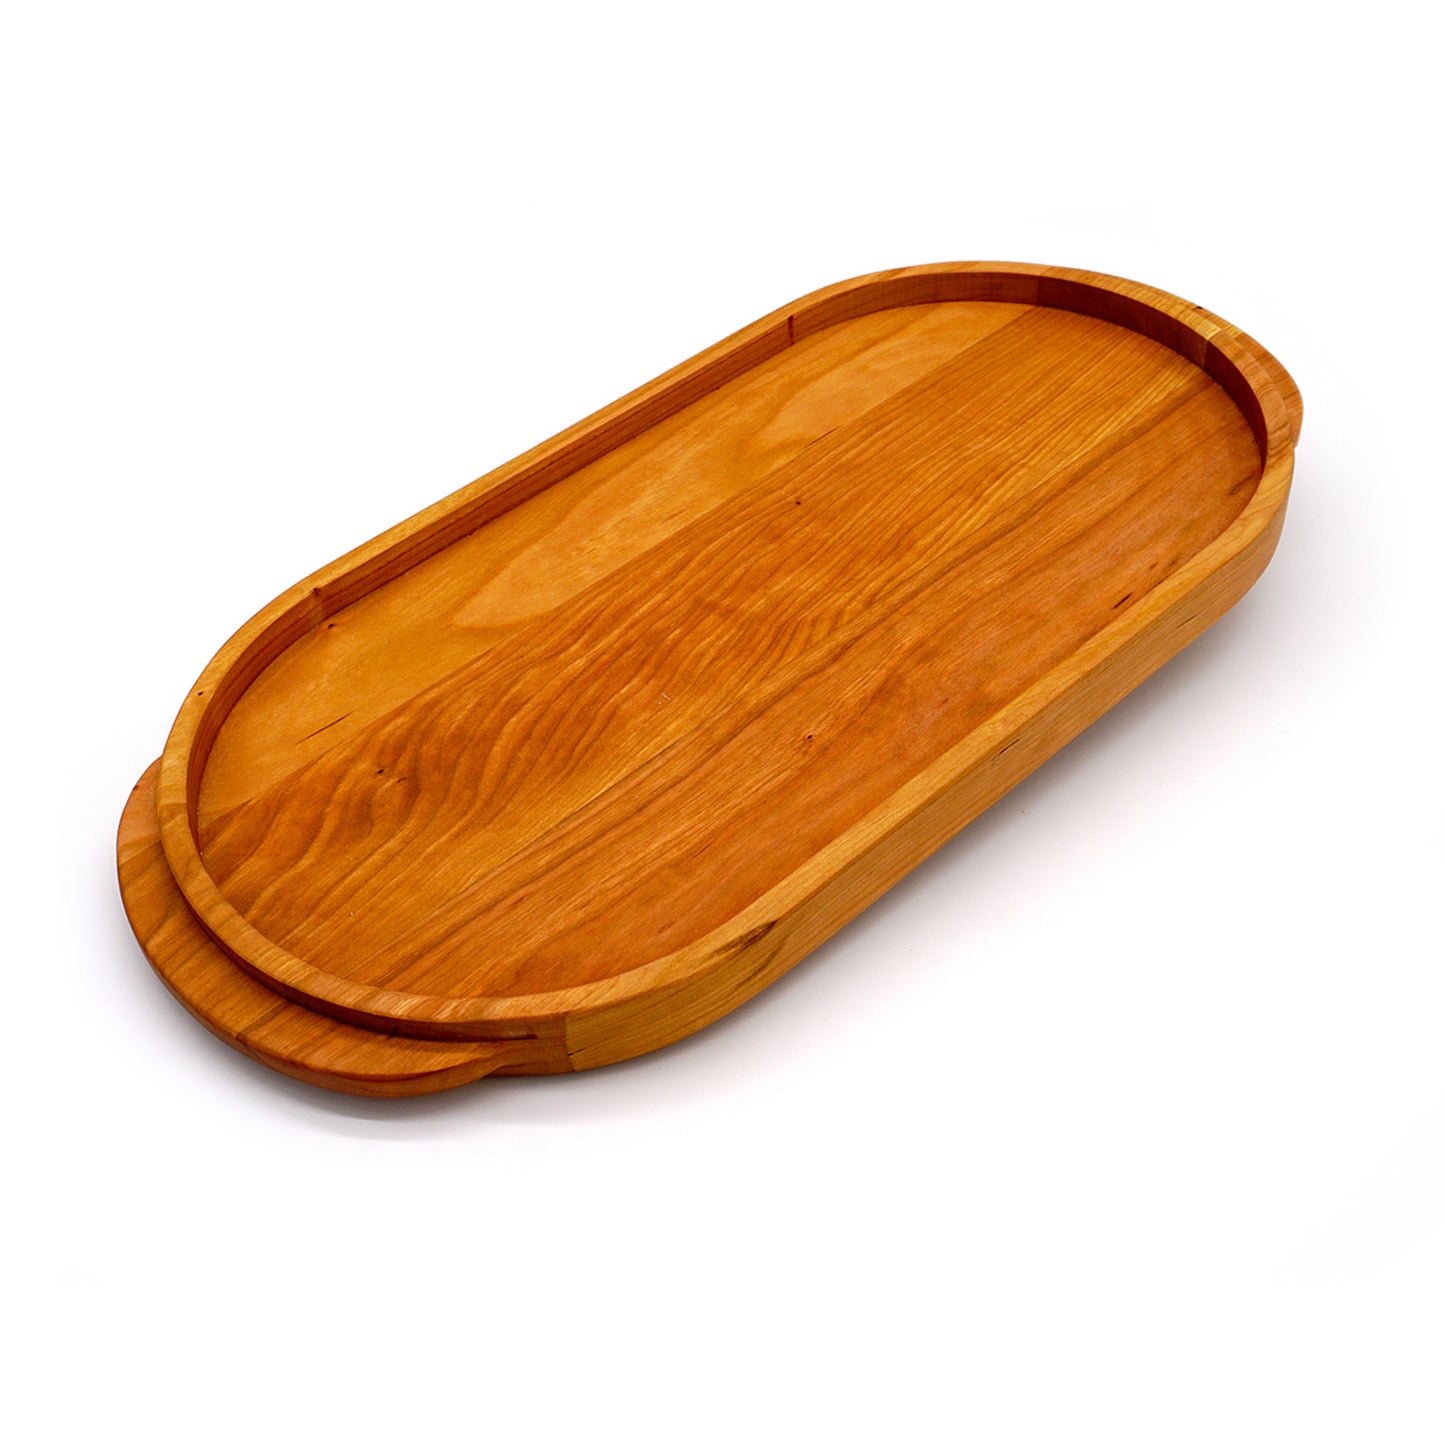 Cherry Oval Wooden Serving Tray-21 1/2" x 10"